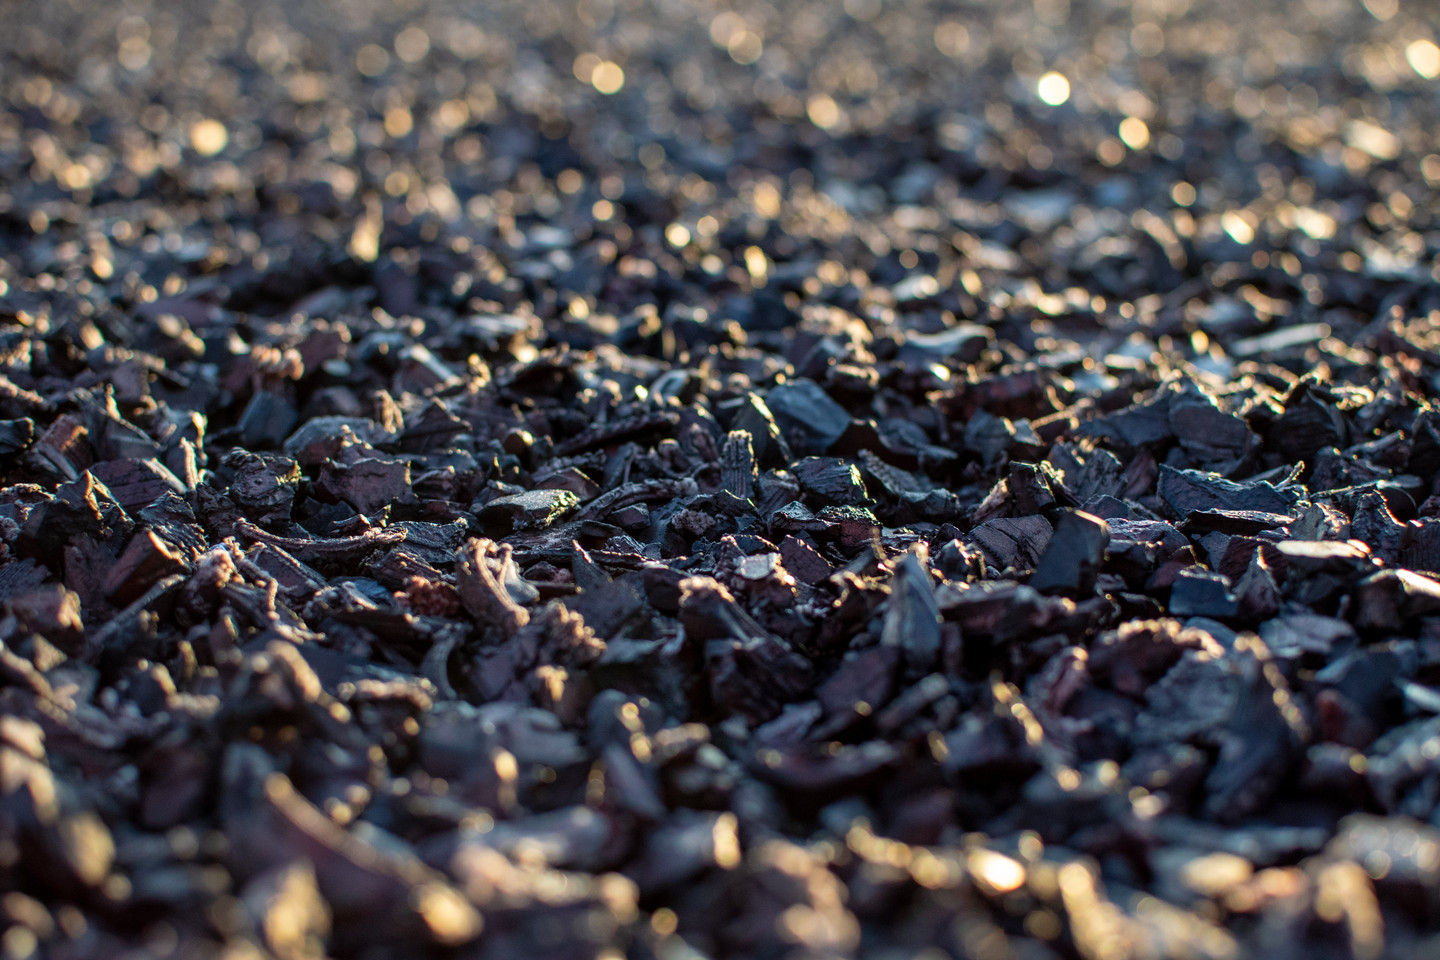 Key West Safety Surfacing-Bonded Rubber Mulch